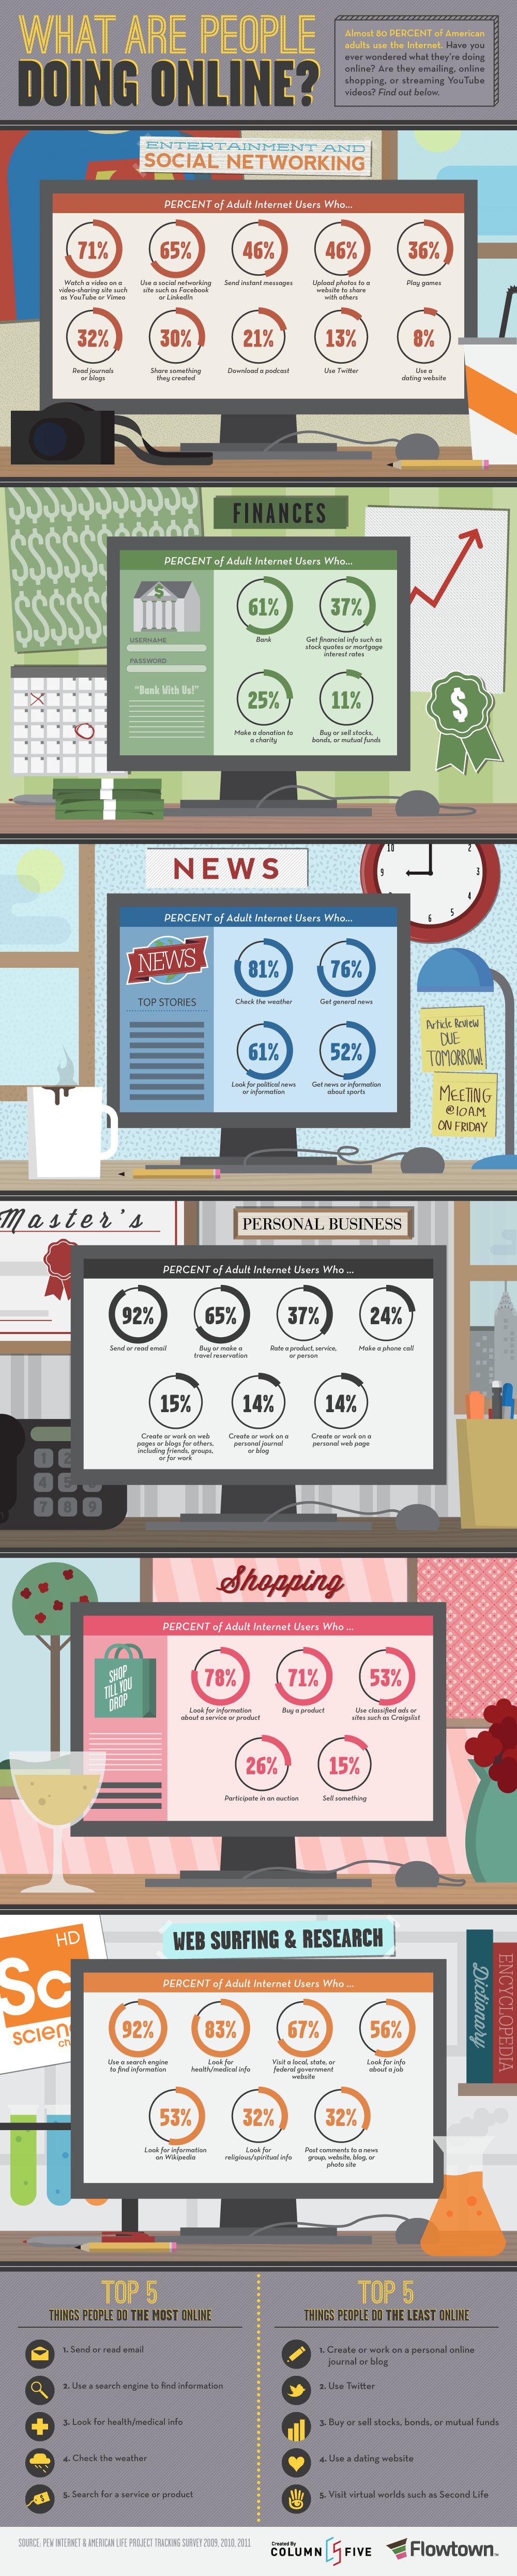 What People Are Really Doing Online [Infographic]